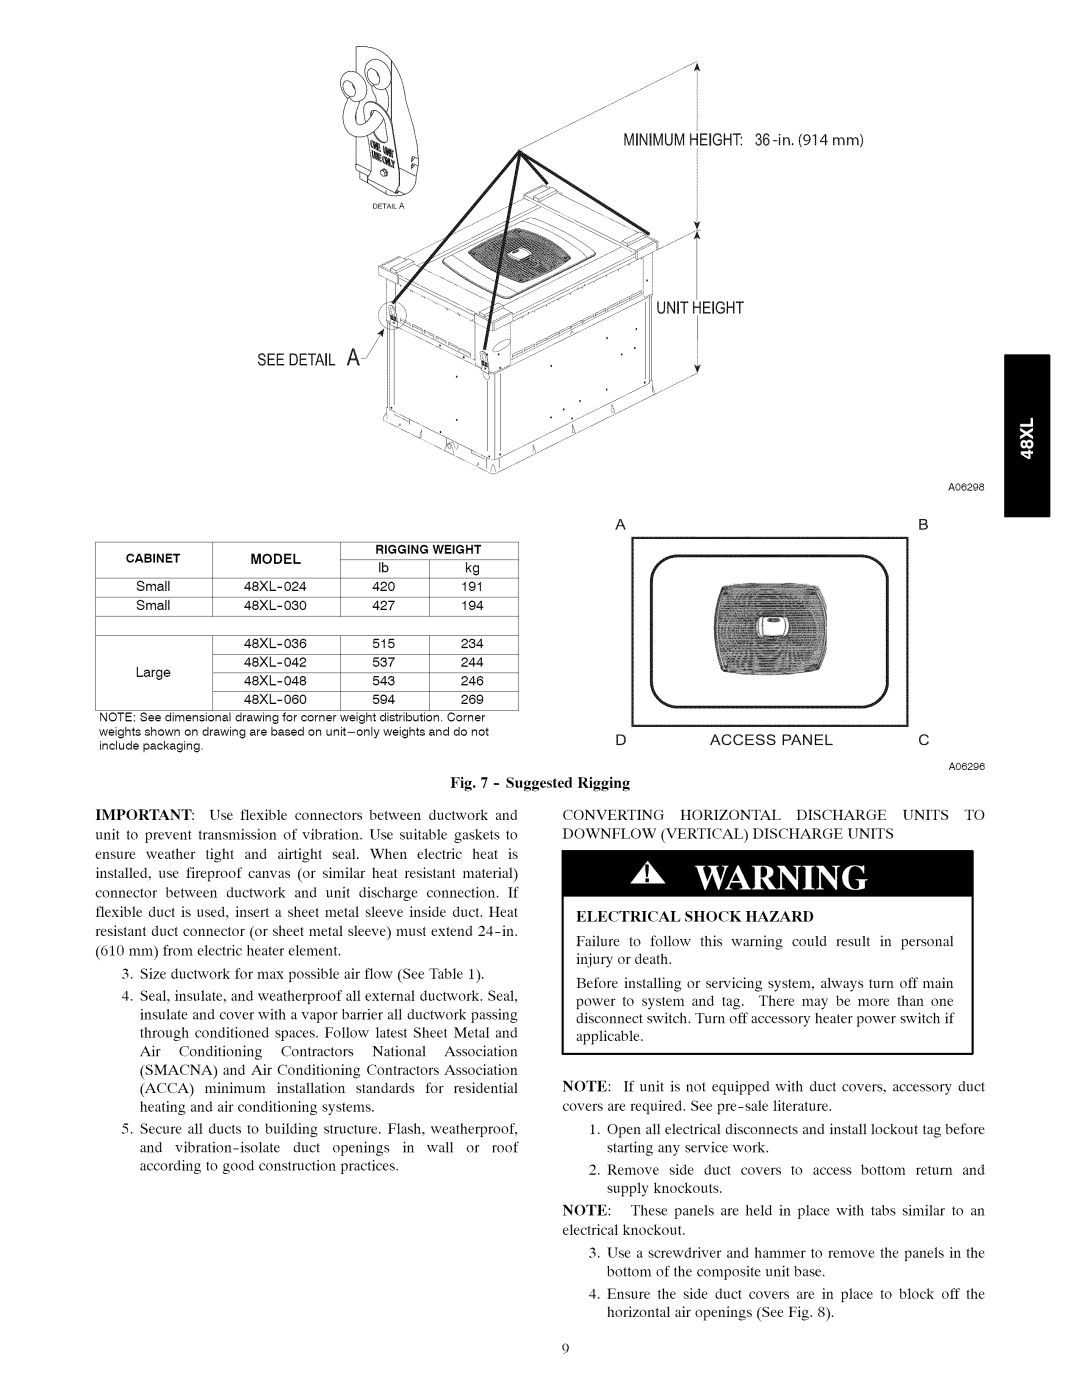 Carrier 48XL installation instructions See Detail A, 36-in.914 mm UNITHEIGHT, Hazard 